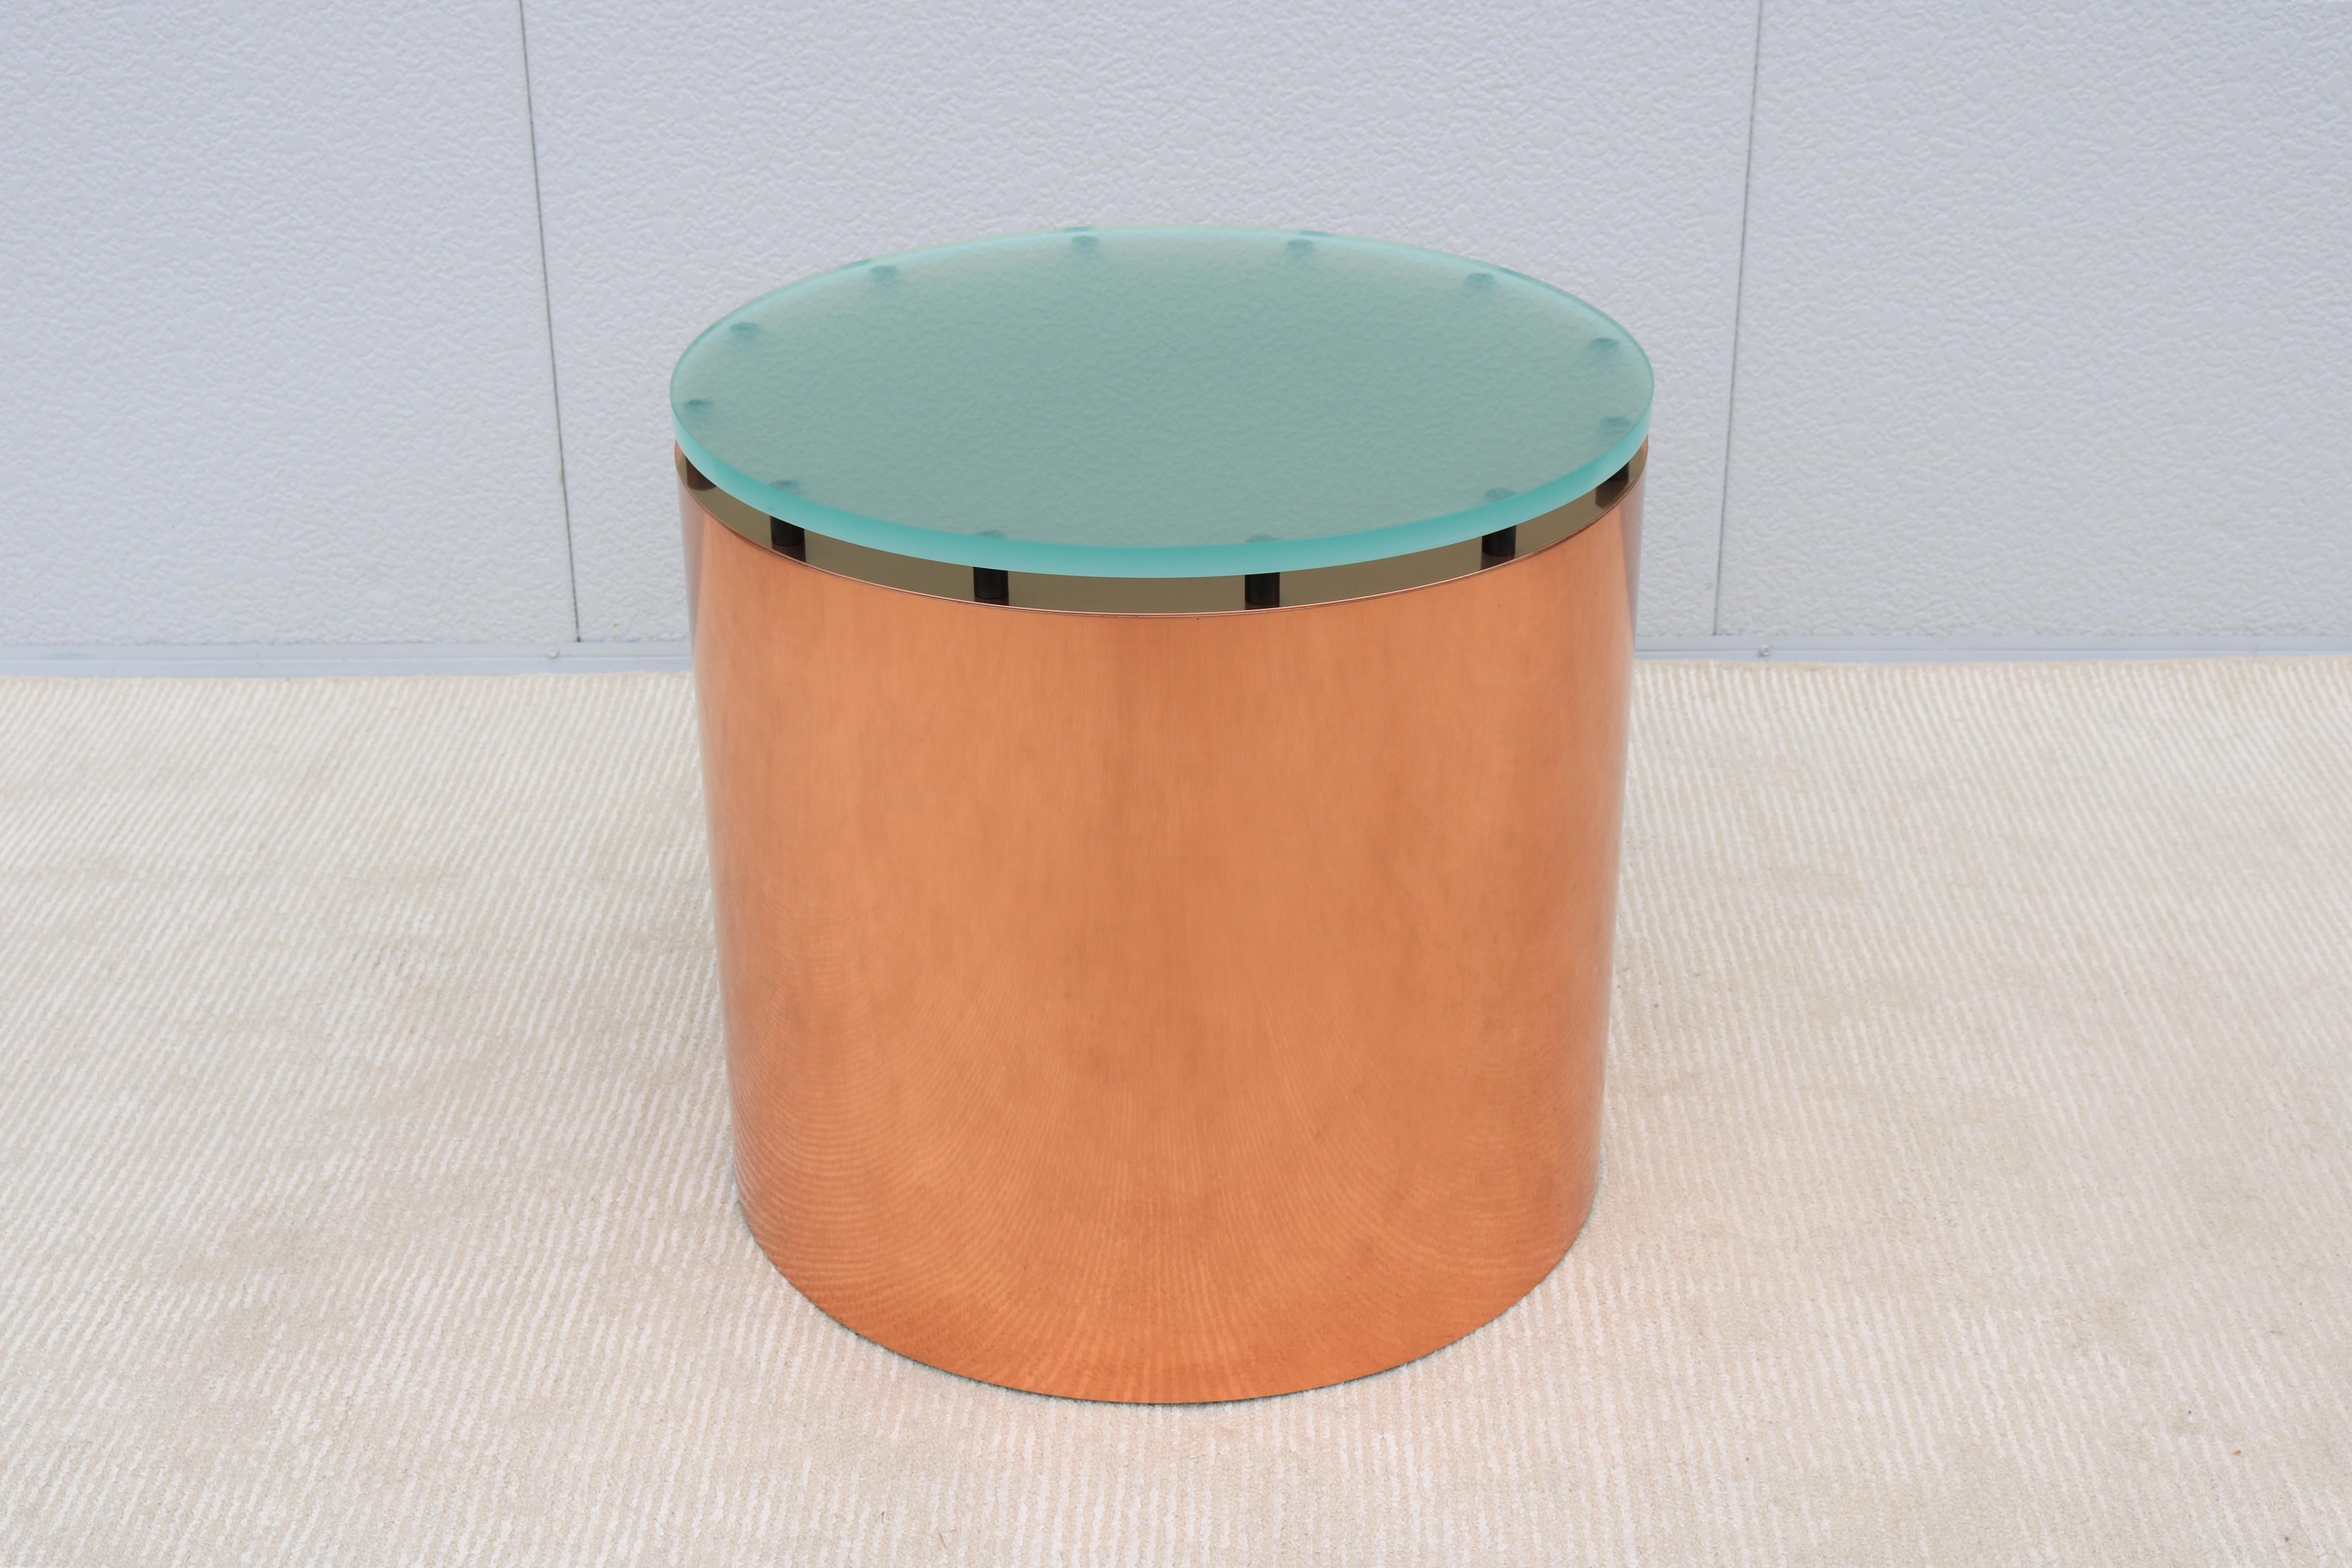 Stunning Paul Mayen style clear frosted glass top and copper plated cylinder drum side table.
Classic American mid-century modern designed in 1970 and remains a current timeless and elegant design today.
The glass floats on top of the base with